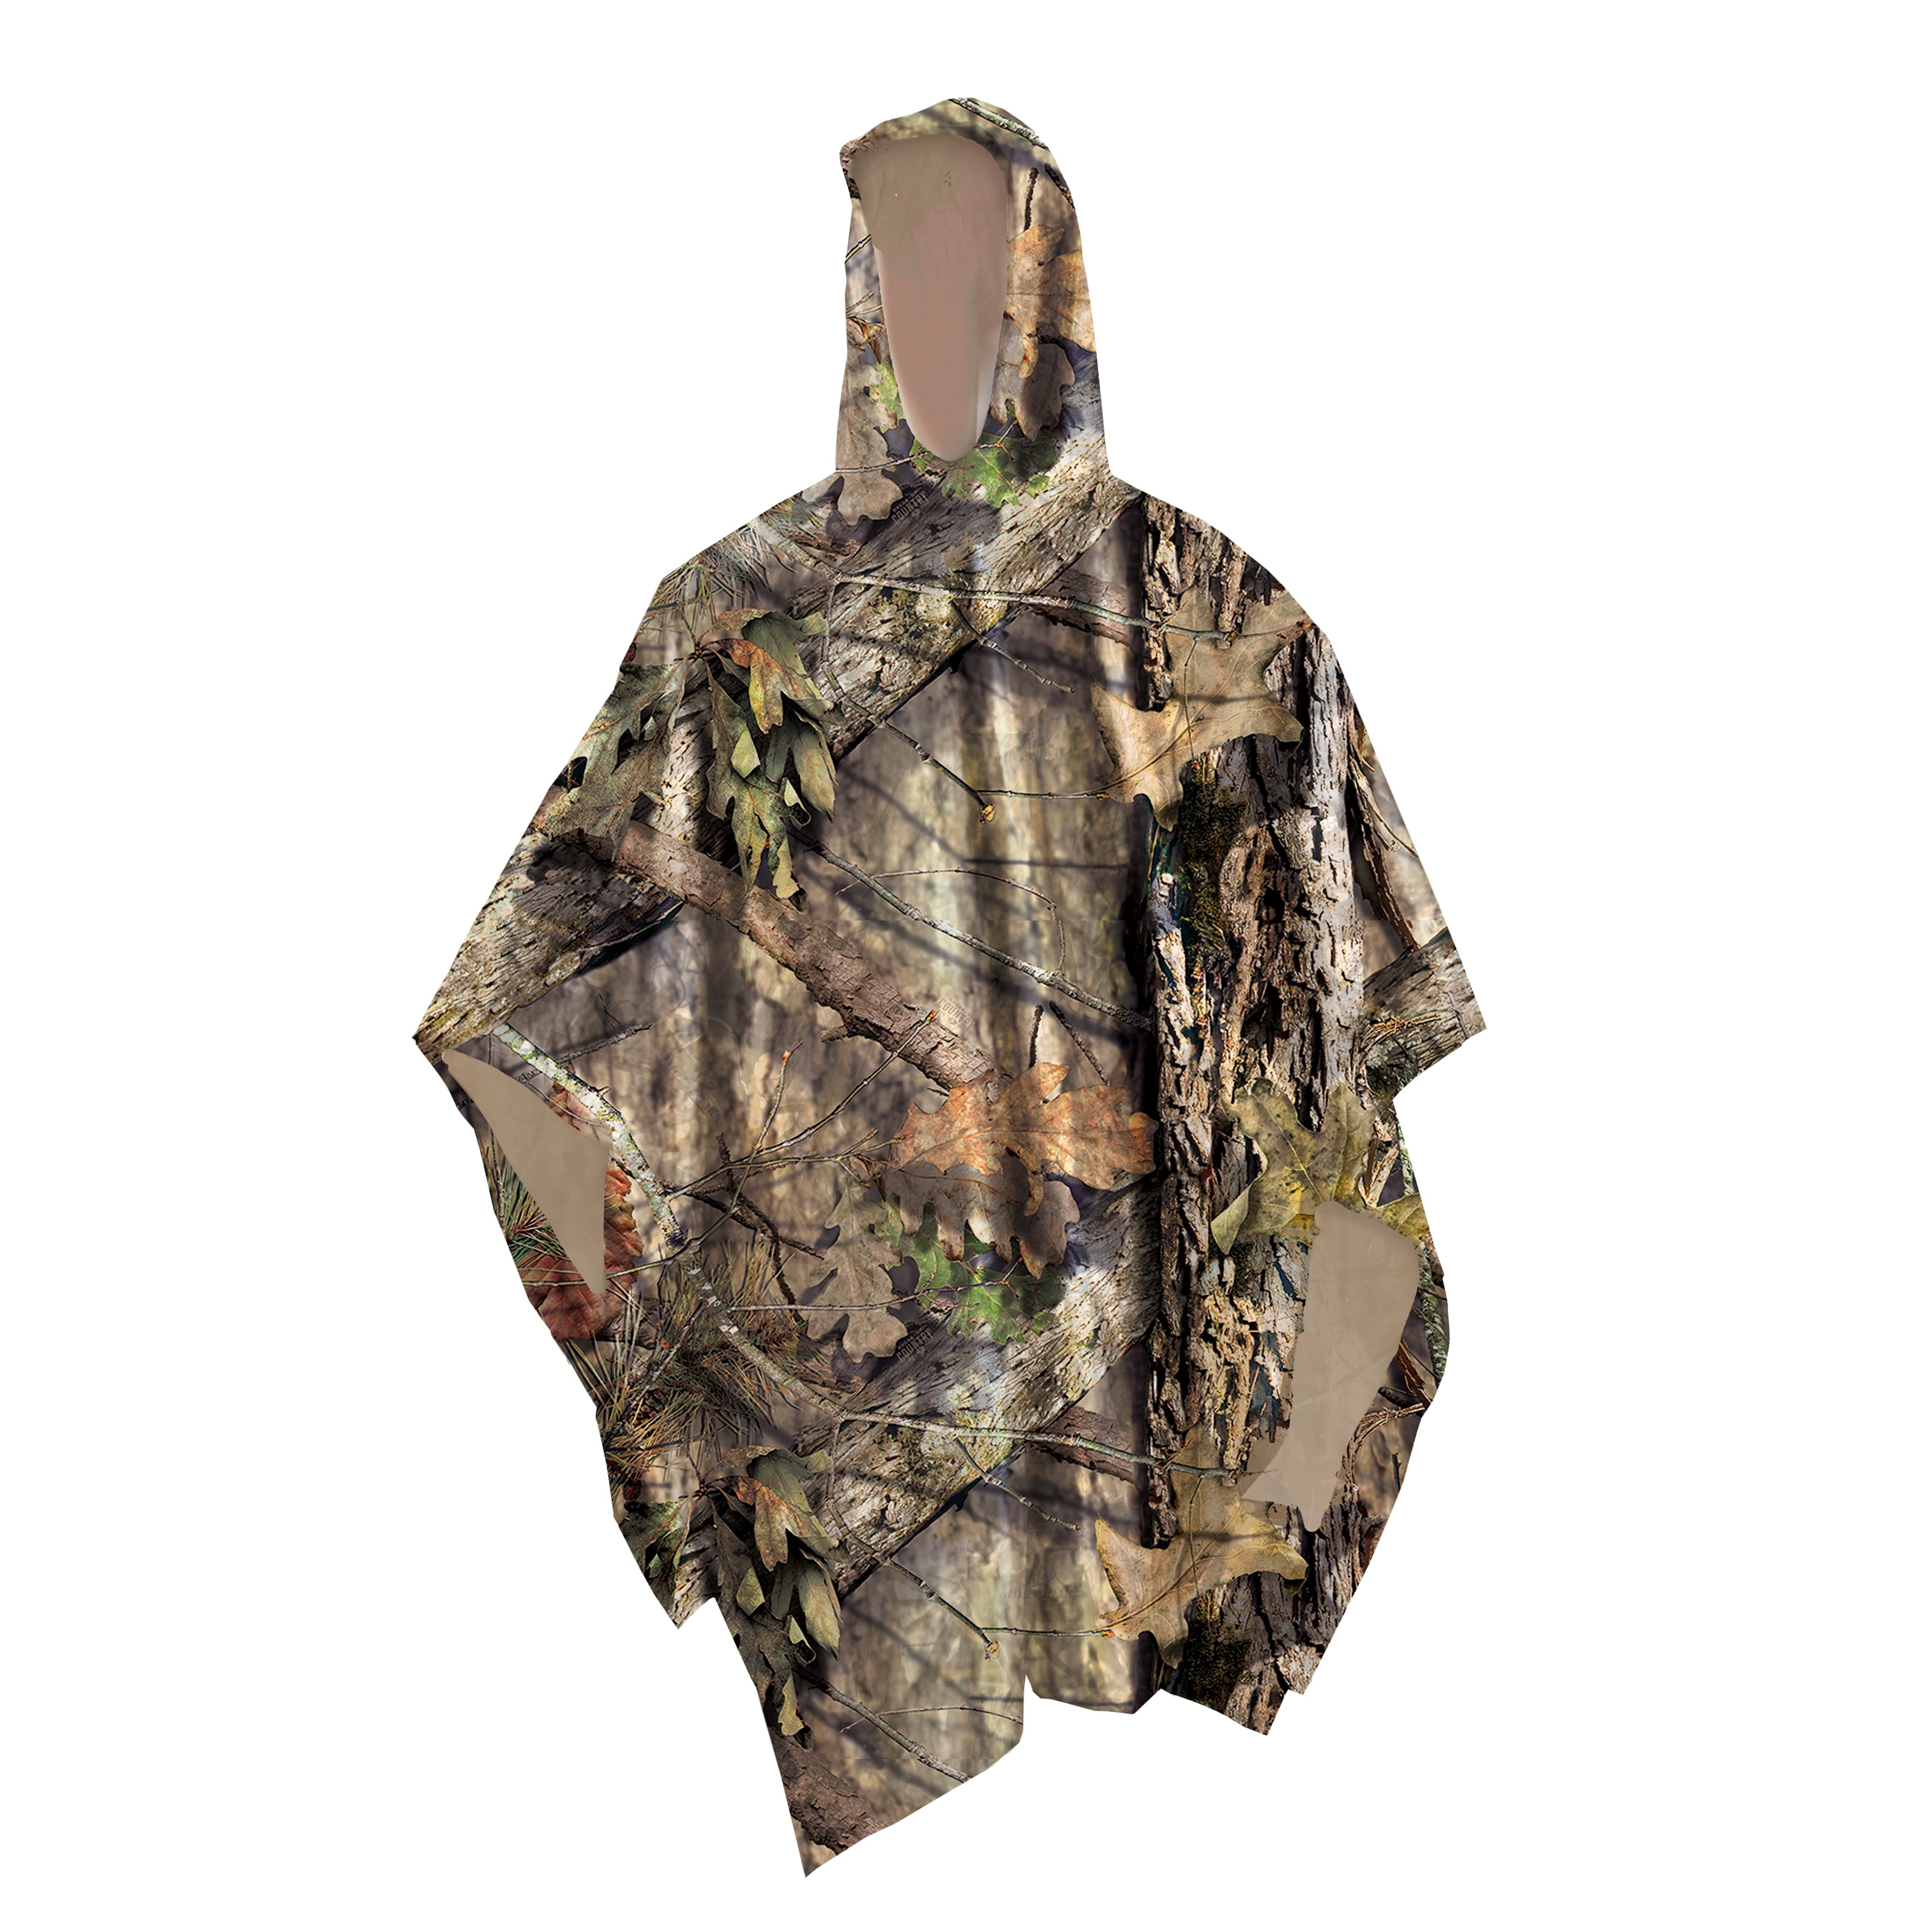 Allen Next G2 Camo Hooded Rain Poncho One Size Hunting Fishing Prepper for sale online 